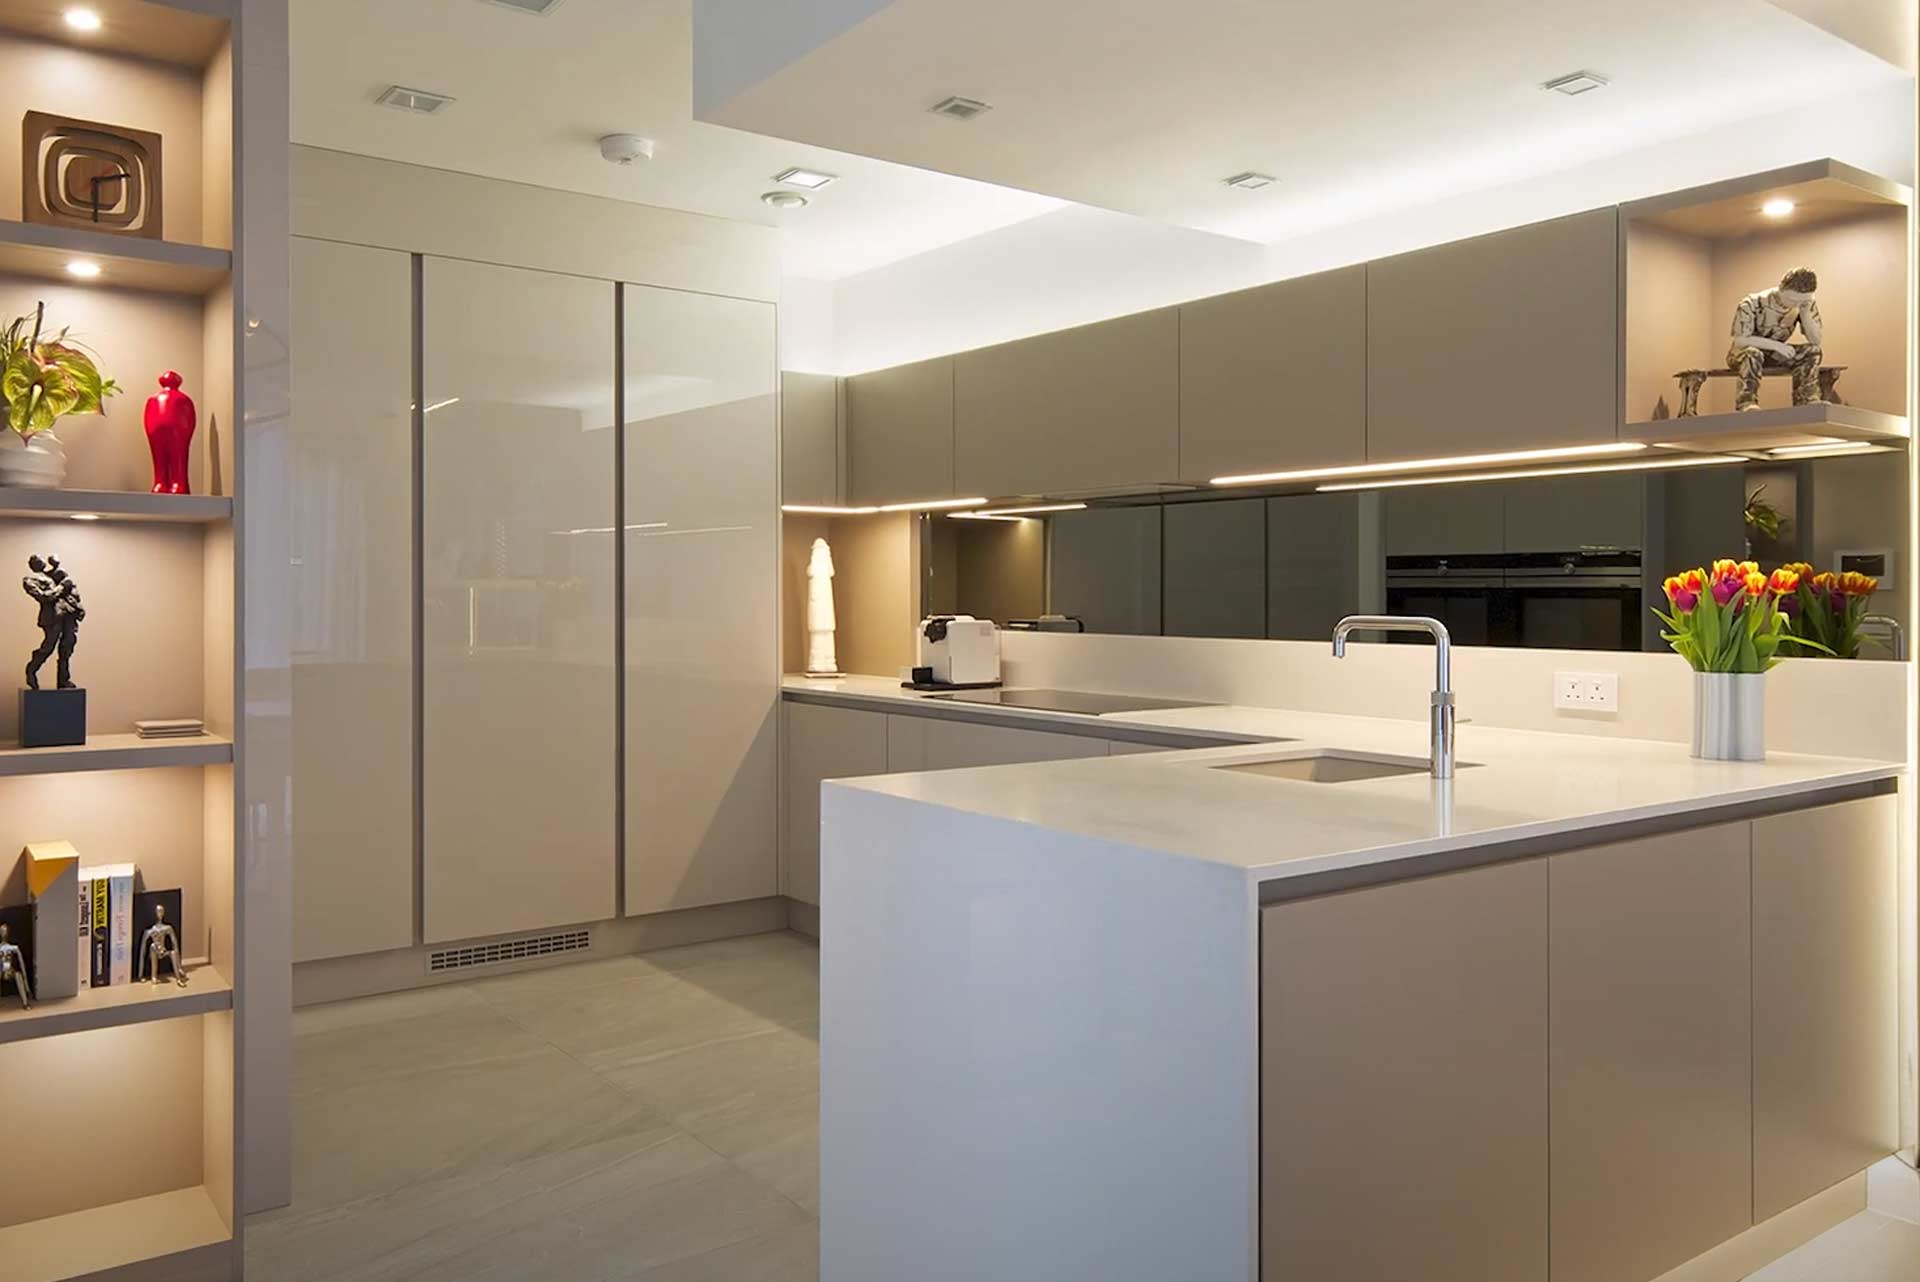 Sleek L-shaped kitchen with sleek cabinets and ligthing fixtures